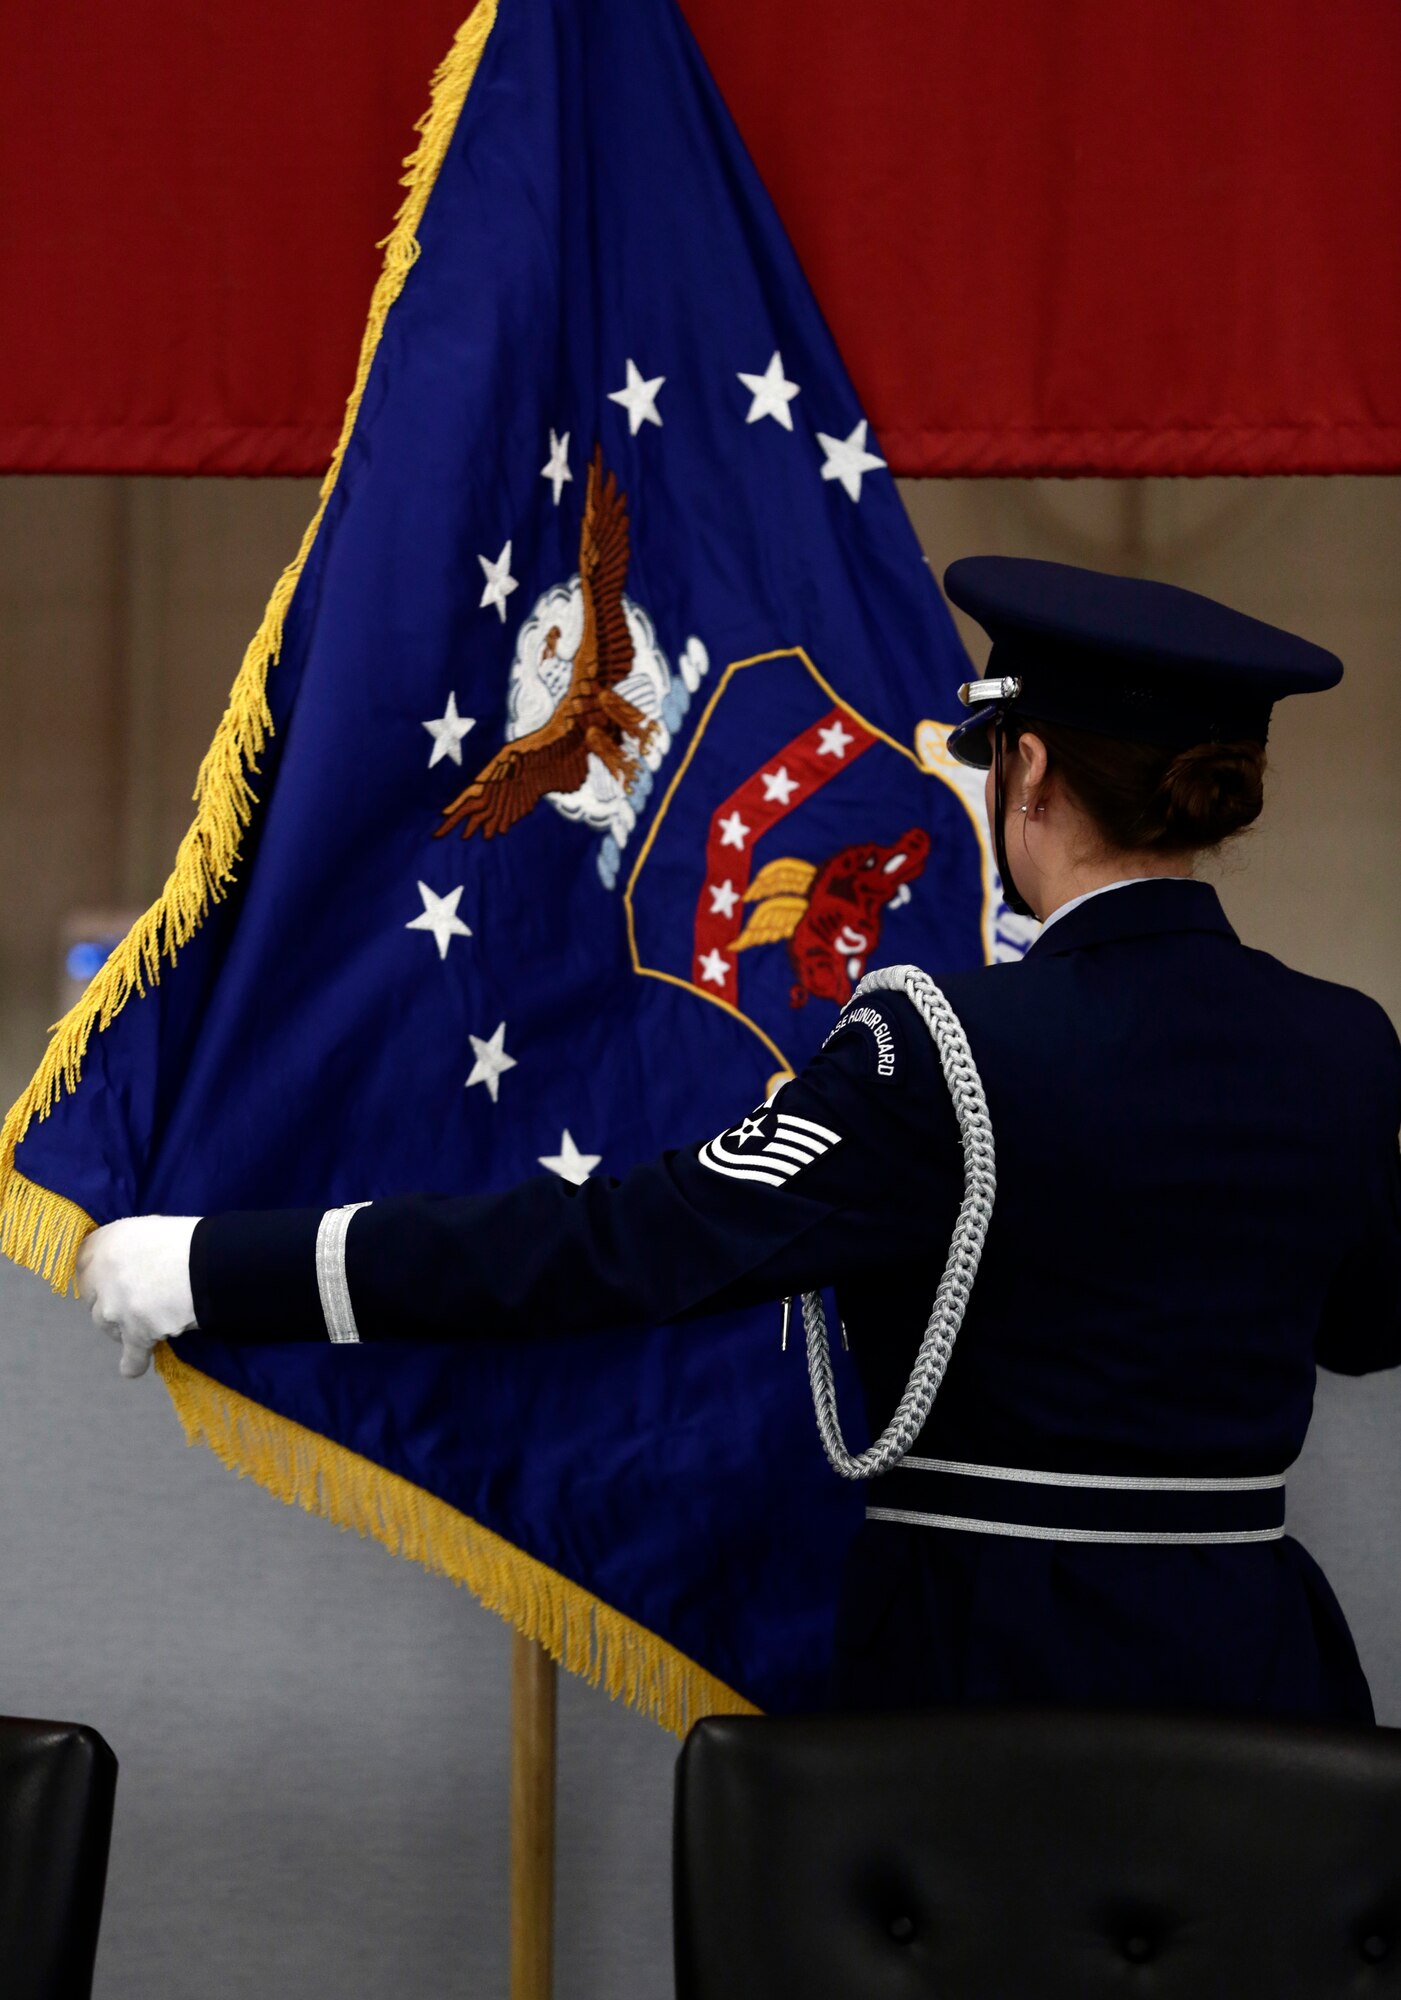 Tech Sgt. Jean Schnauffer, right, carries the new 188th Wing flag while Staff Sgt. Caressa Soriano, left, carries the furled 188th Fighter Wing flag as Senior Airman Richard Green stands at attention during a Conversion Day ceremony held at Ebbing Air National Guard Base, Fort Smith, Arkansas, June 7, 2014. The ceremony was to recognize the many changes occurring at the wing as a result of its conversion to a remotely piloted aircraft (MQ-9 Reapers) and intelligence, surveillance and reconnaissance mission. The 188th Fighter Wing was redesignated as the 188th Wing during the event. (U.S. Air National Guard photo by Staff Sgt. Matthew Pelkey) 